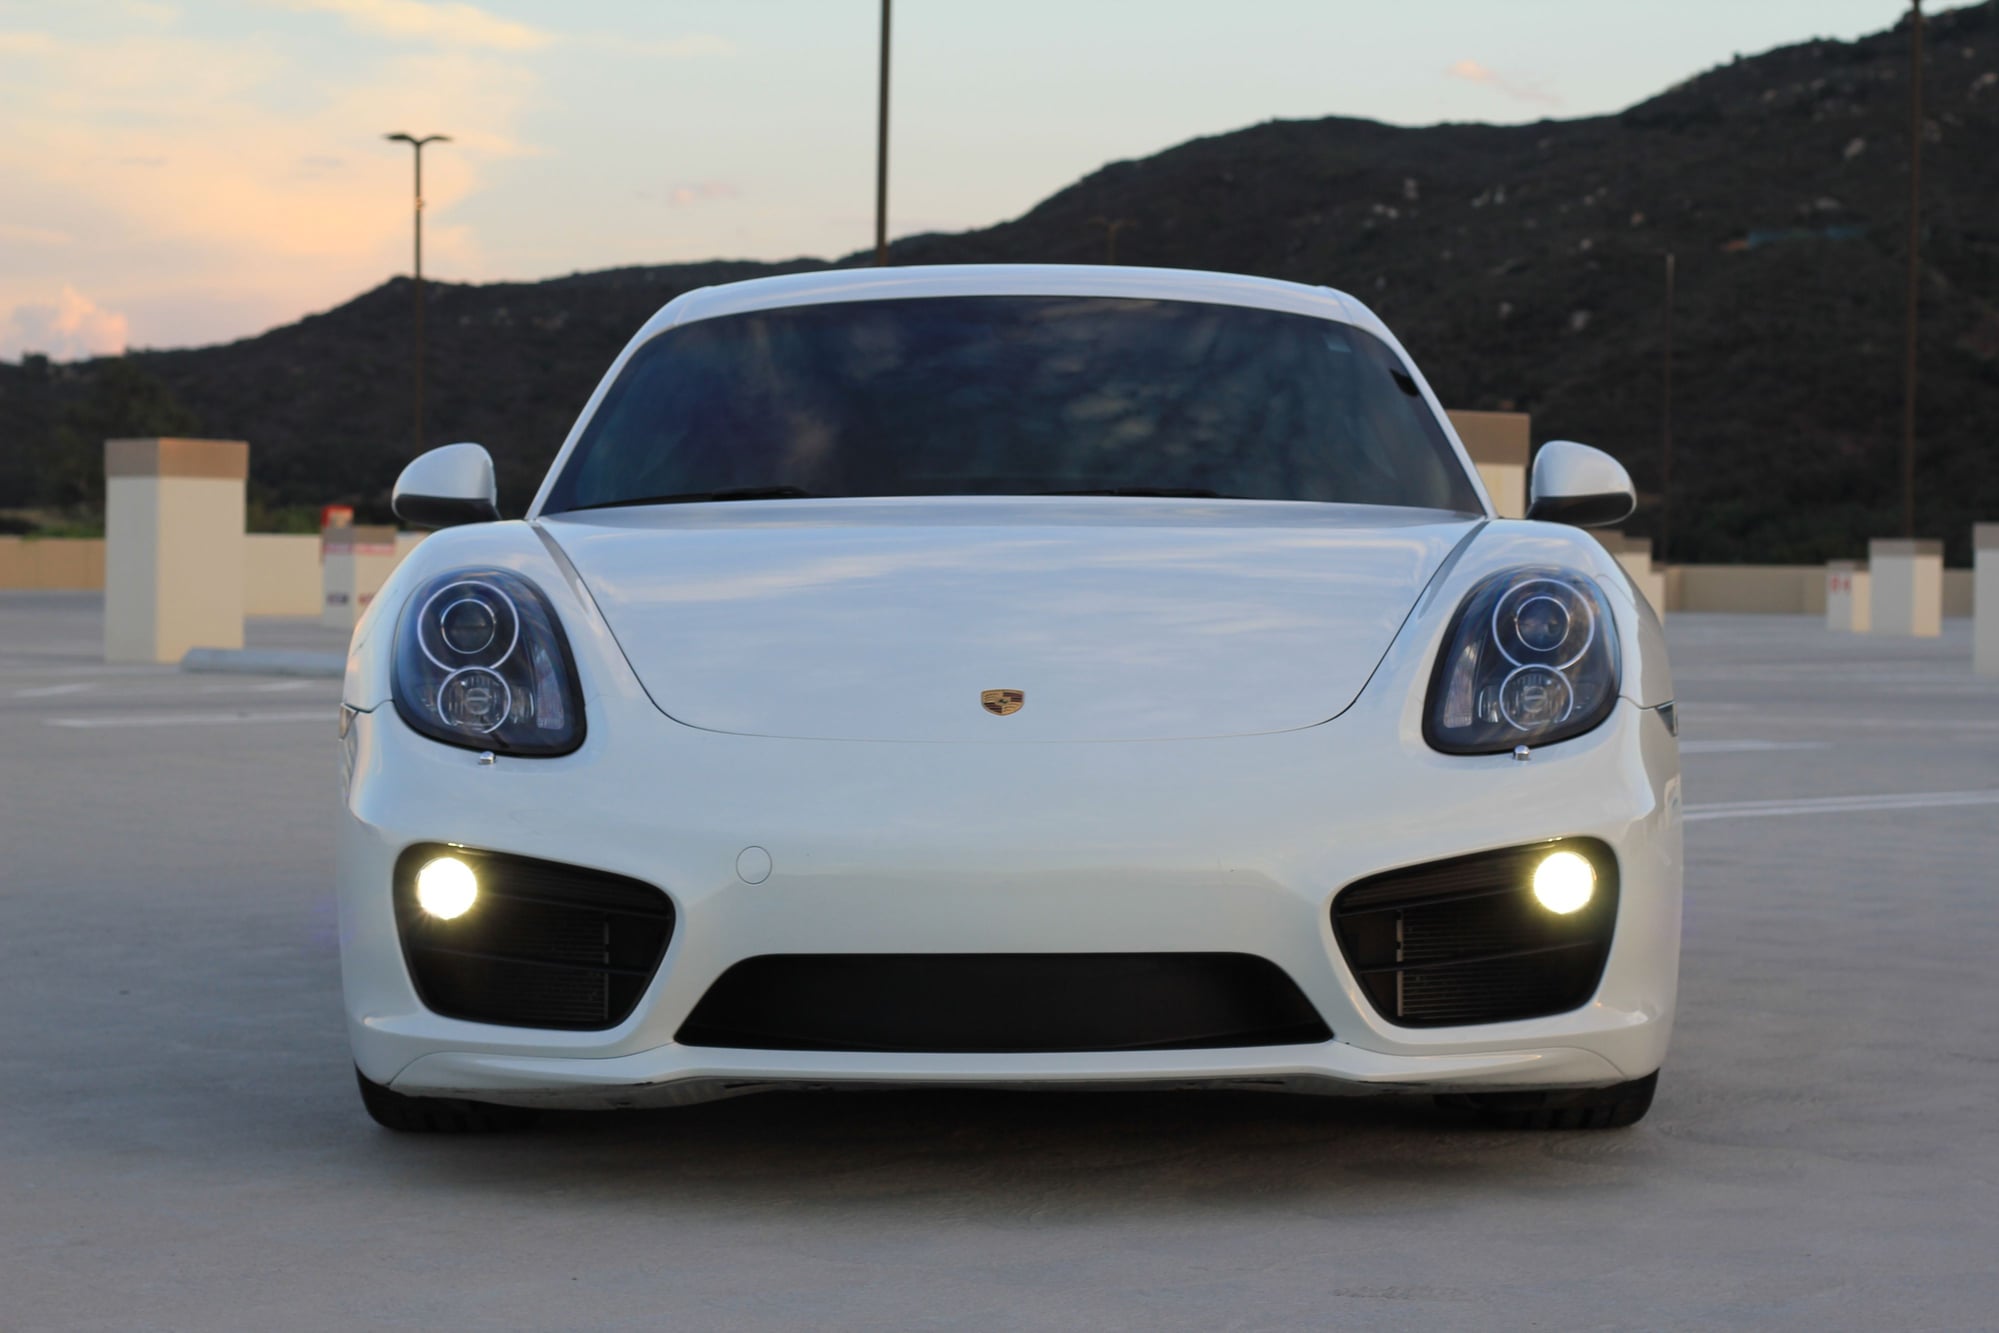 2014 Porsche Cayman - 2014 Cayman S ....Minty white on black with X73 and much more - Used - VIN WPOAB2A81EK192443 - 6 cyl - 2WD - Automatic - Coupe - White - Temecula, CA 92592, United States